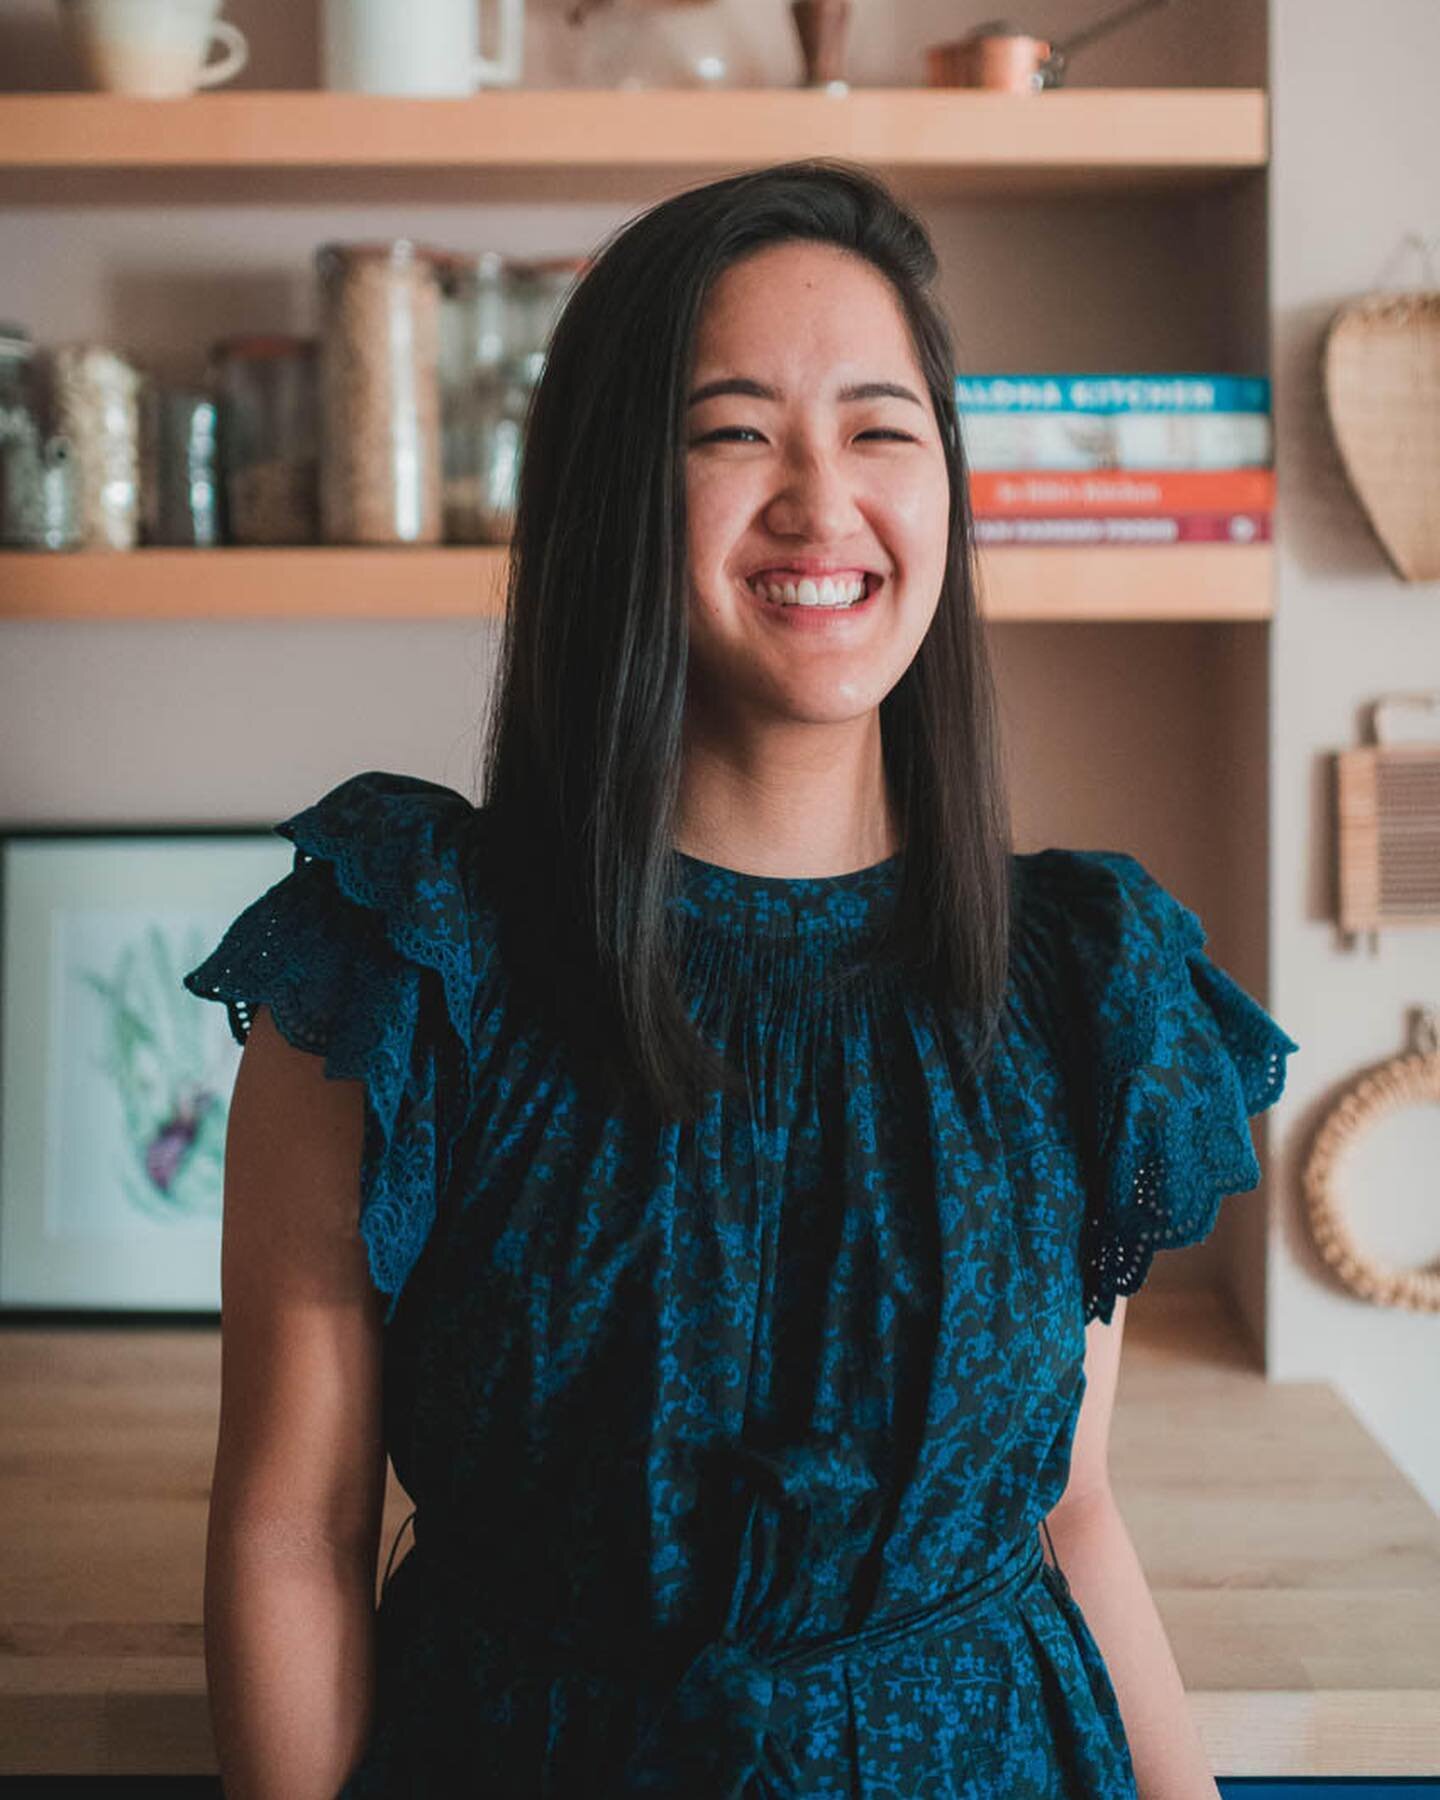 We&rsquo;re thrilled to have Betty Liu on the podcast today to discuss her new book, My Shanghai. She helps break down for us what makes Shangainese cooking unique and where to find the best food in the city. Betty is a true force to be reckoned with